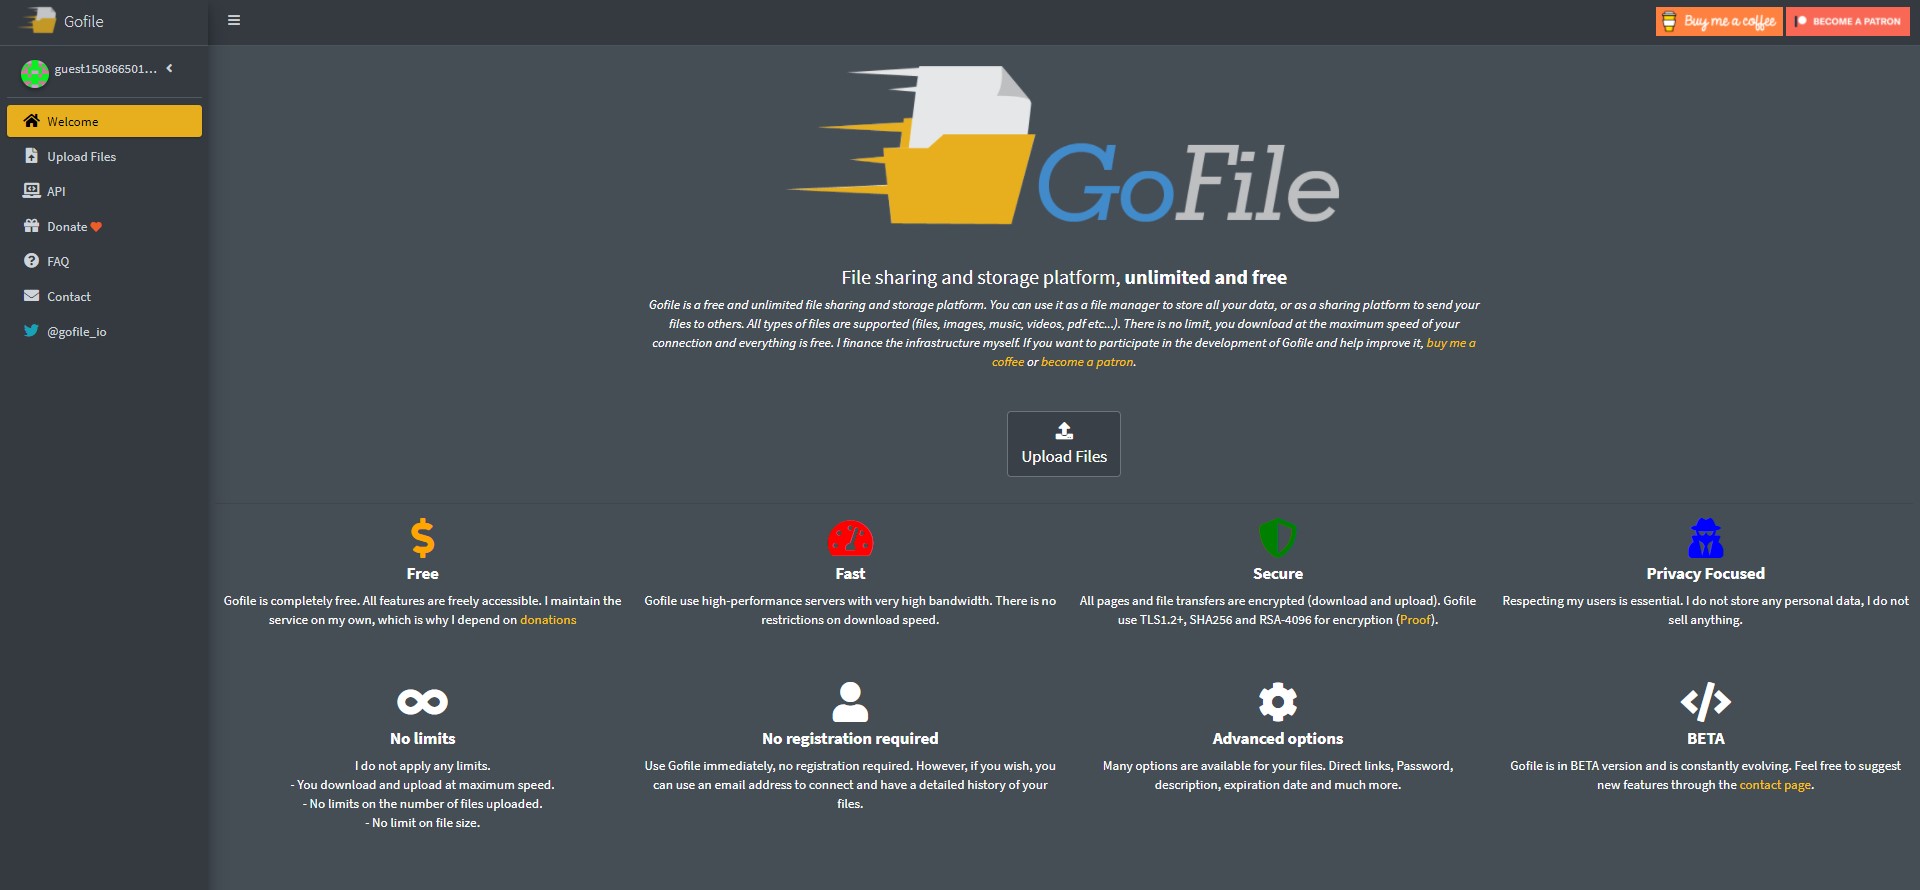 Is gofile.io safe